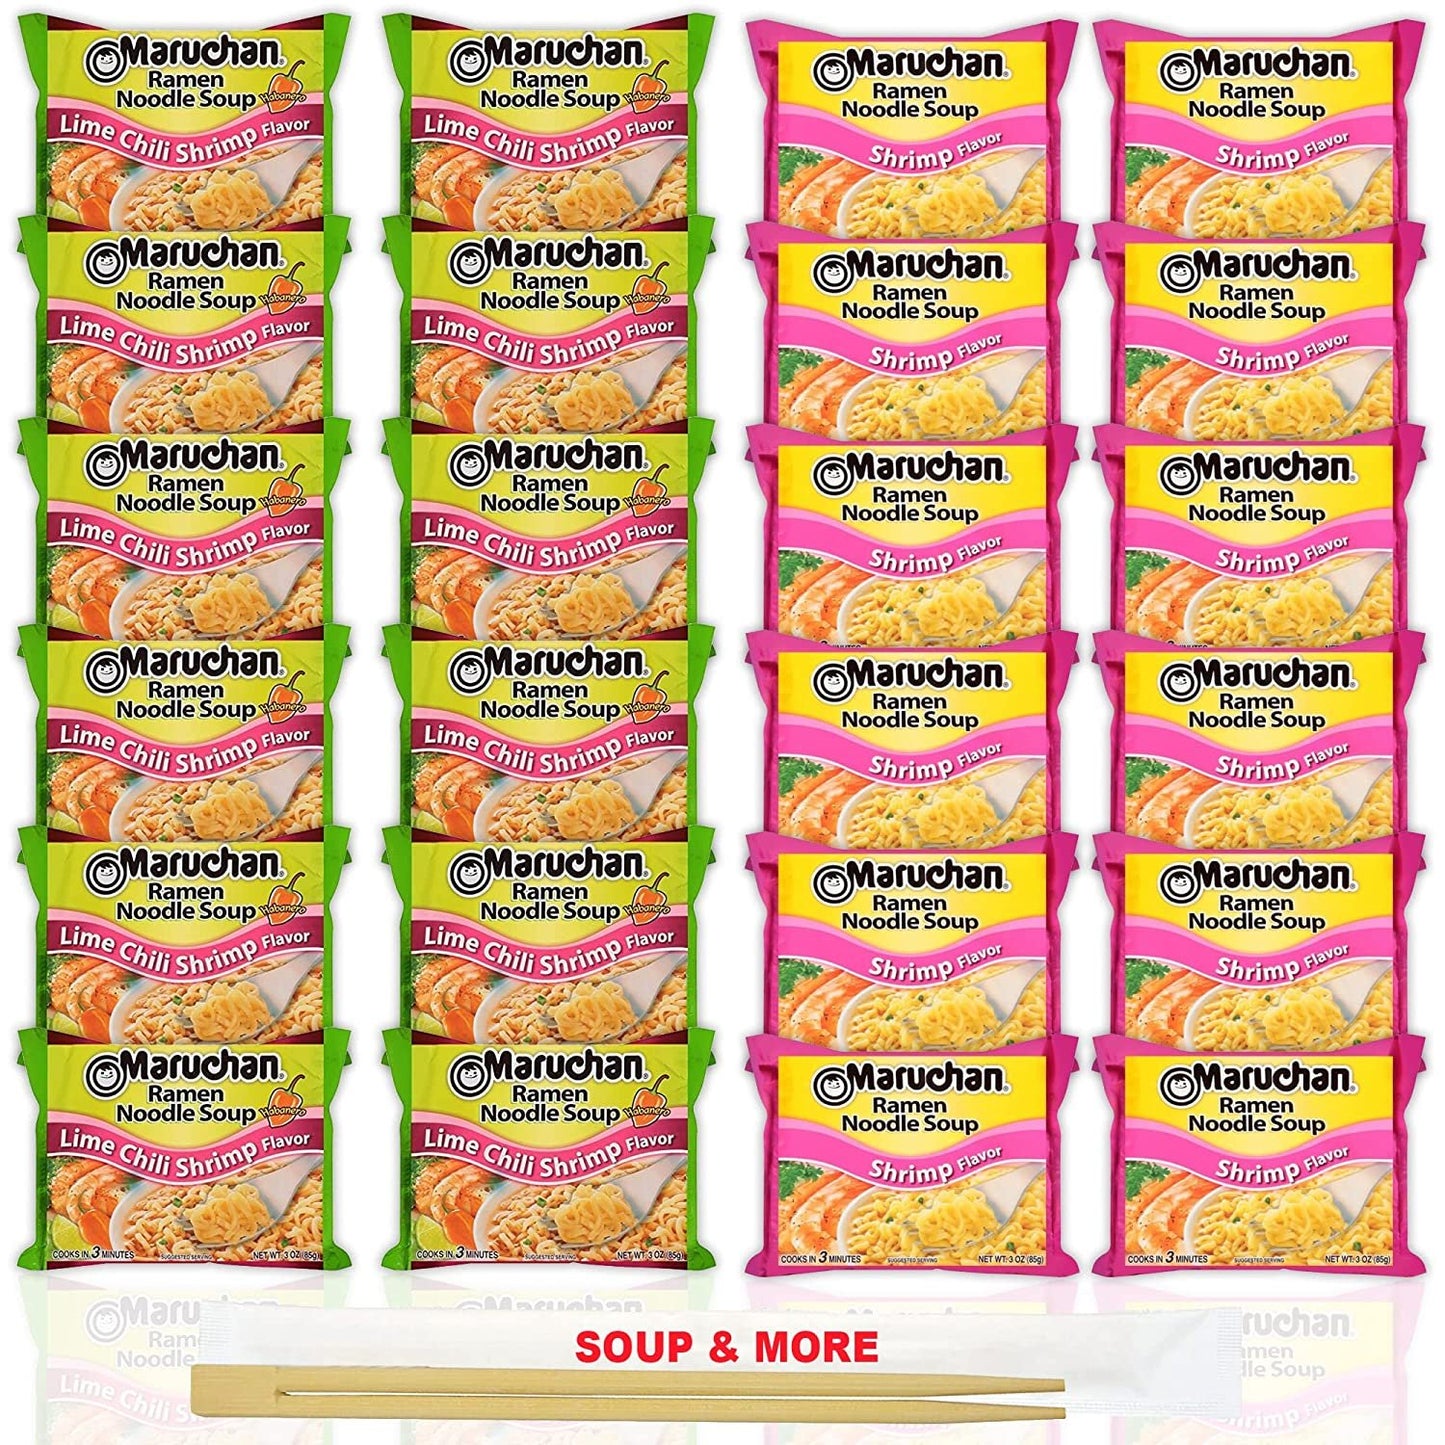 Maruchan Ramen Instant Noodle Soup Variety, 2 Flavors - 12 Packs Lime Chili Shrimp & 12 Packs Chili , 3 Ounce Single Servings Lunch / Dinner Variety